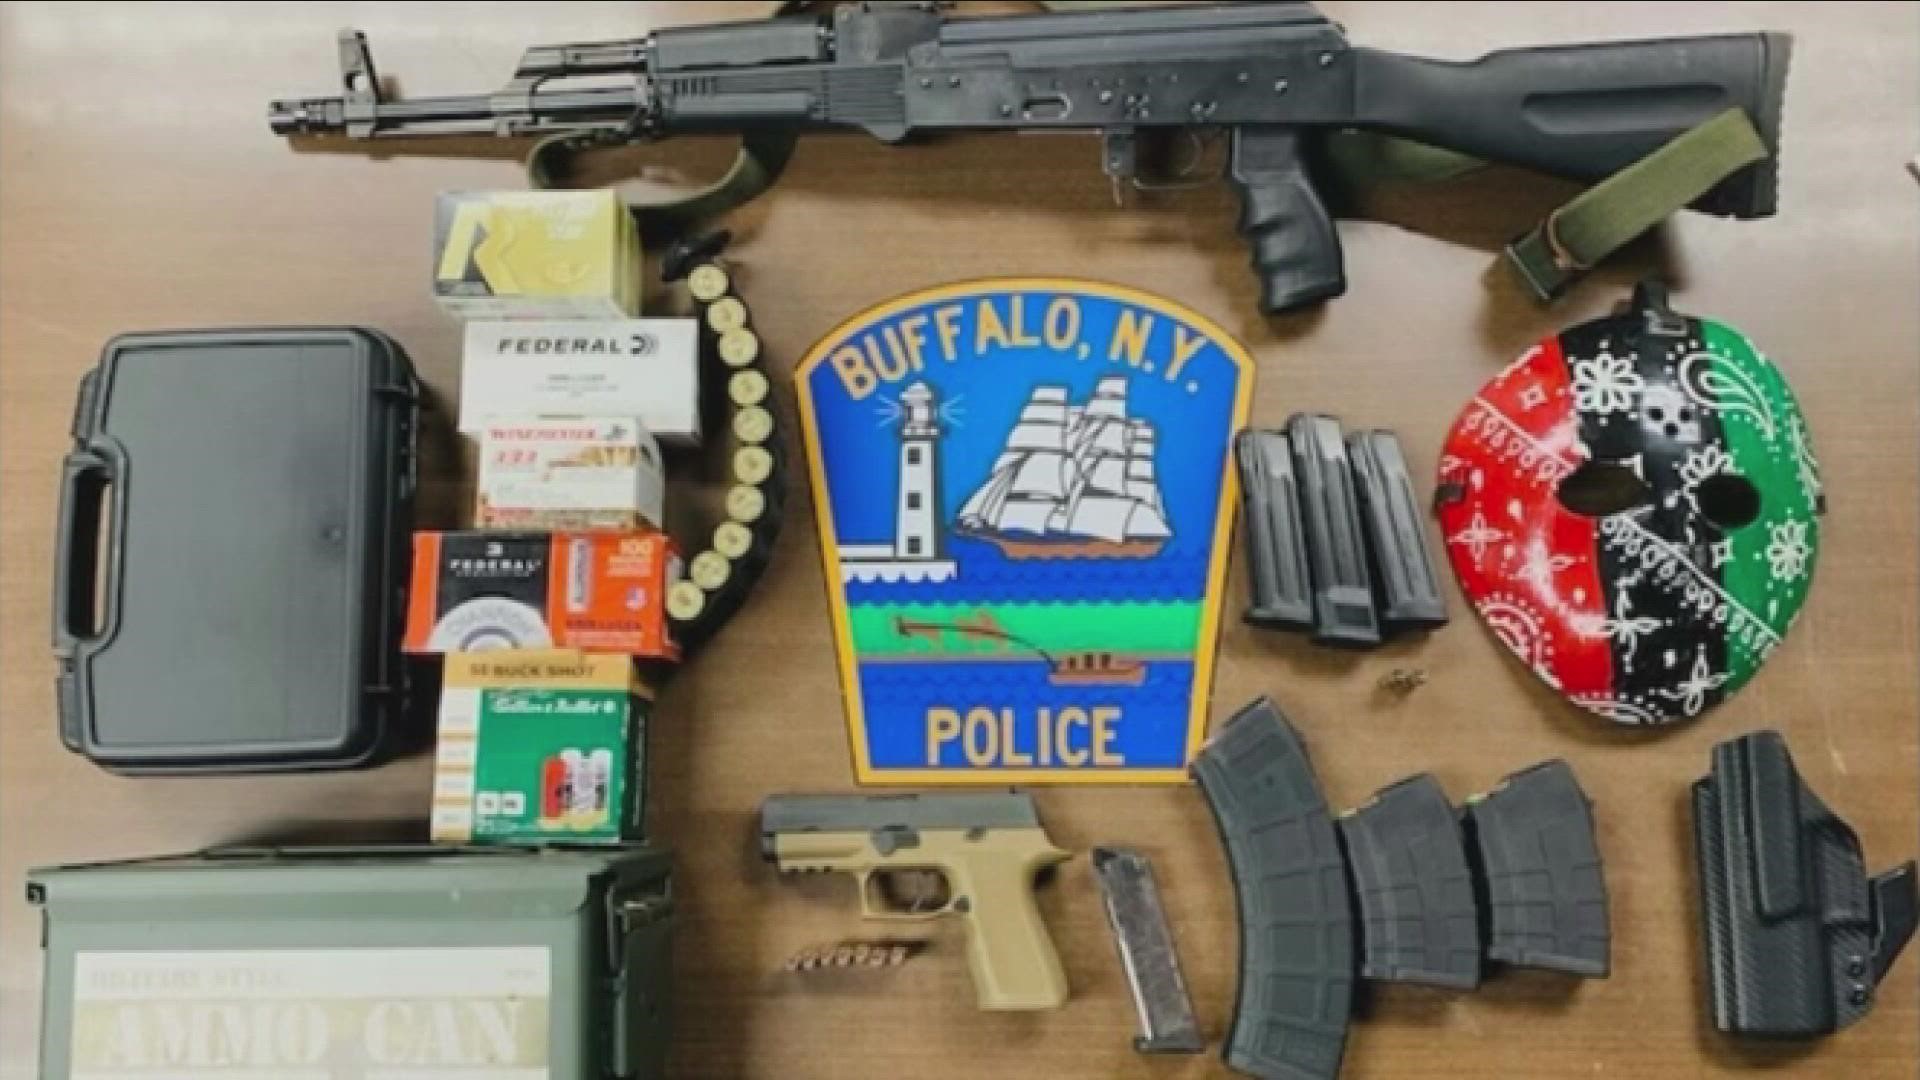 Guns and Ammo found in Buffalo home